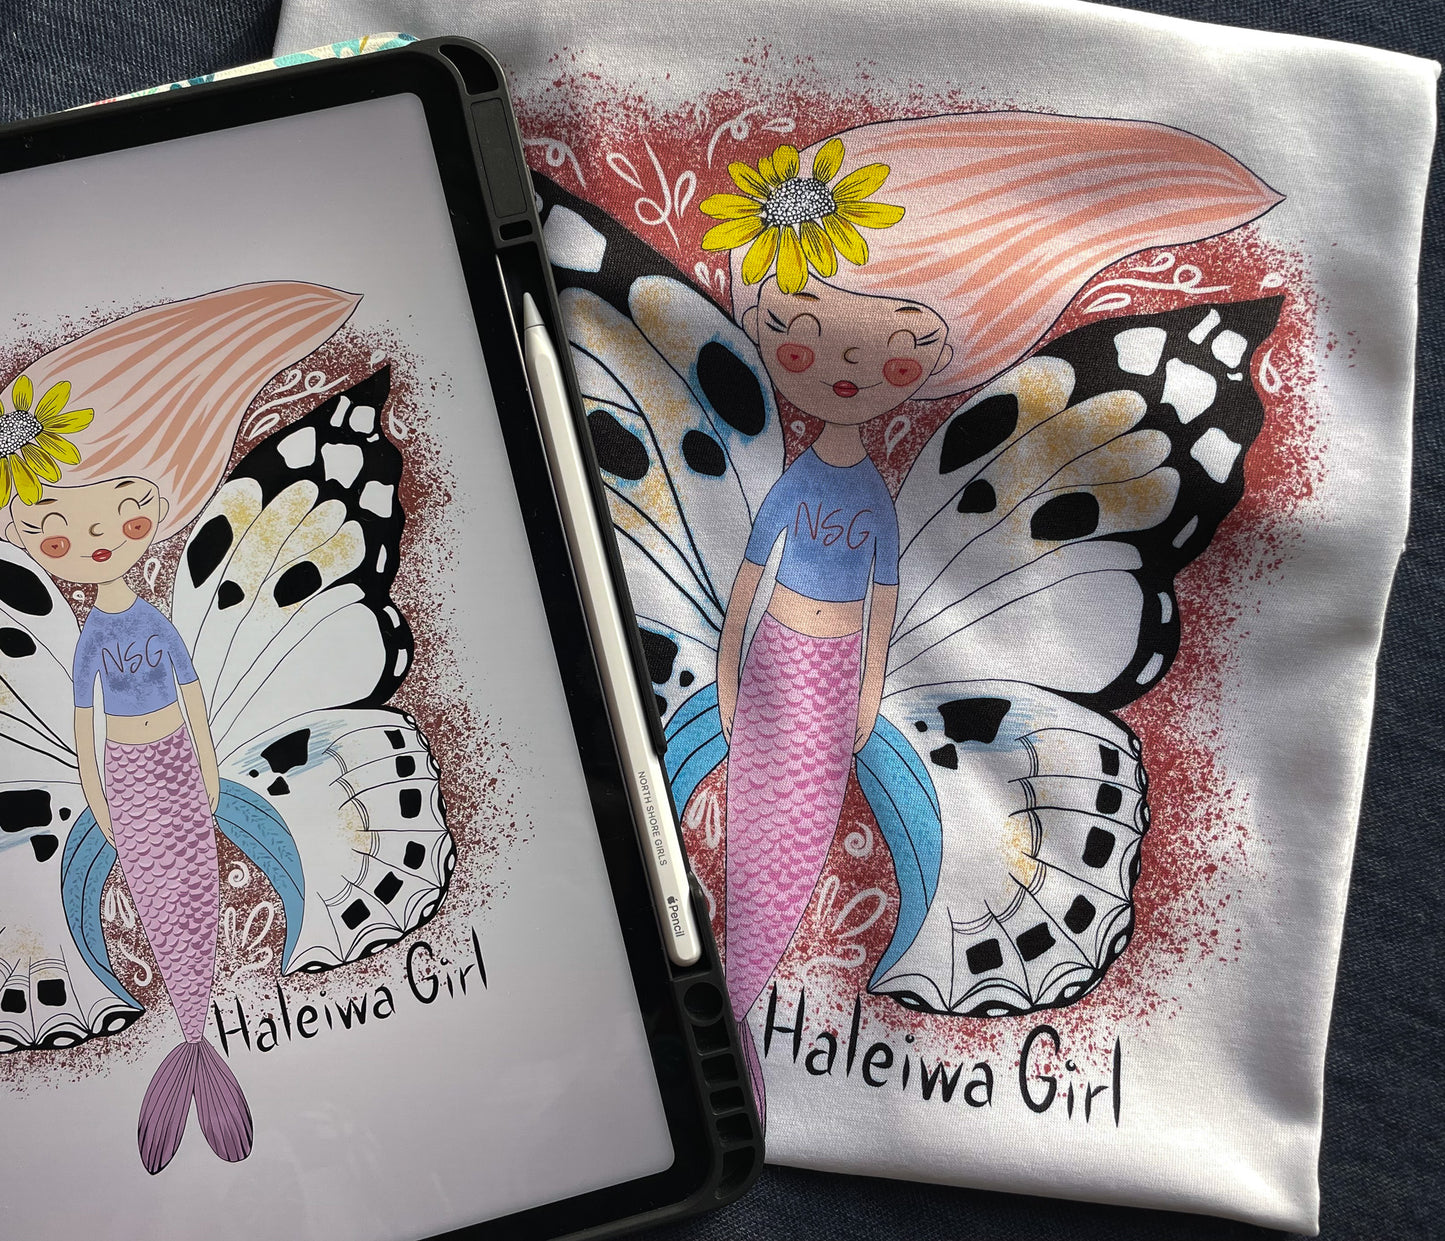 Artist Handmade Illustrated graphic tee for kids. Mermaid Butterfly inspired by Haleiwa town, Hawaii. North Shore Girls T-shirt collection for children